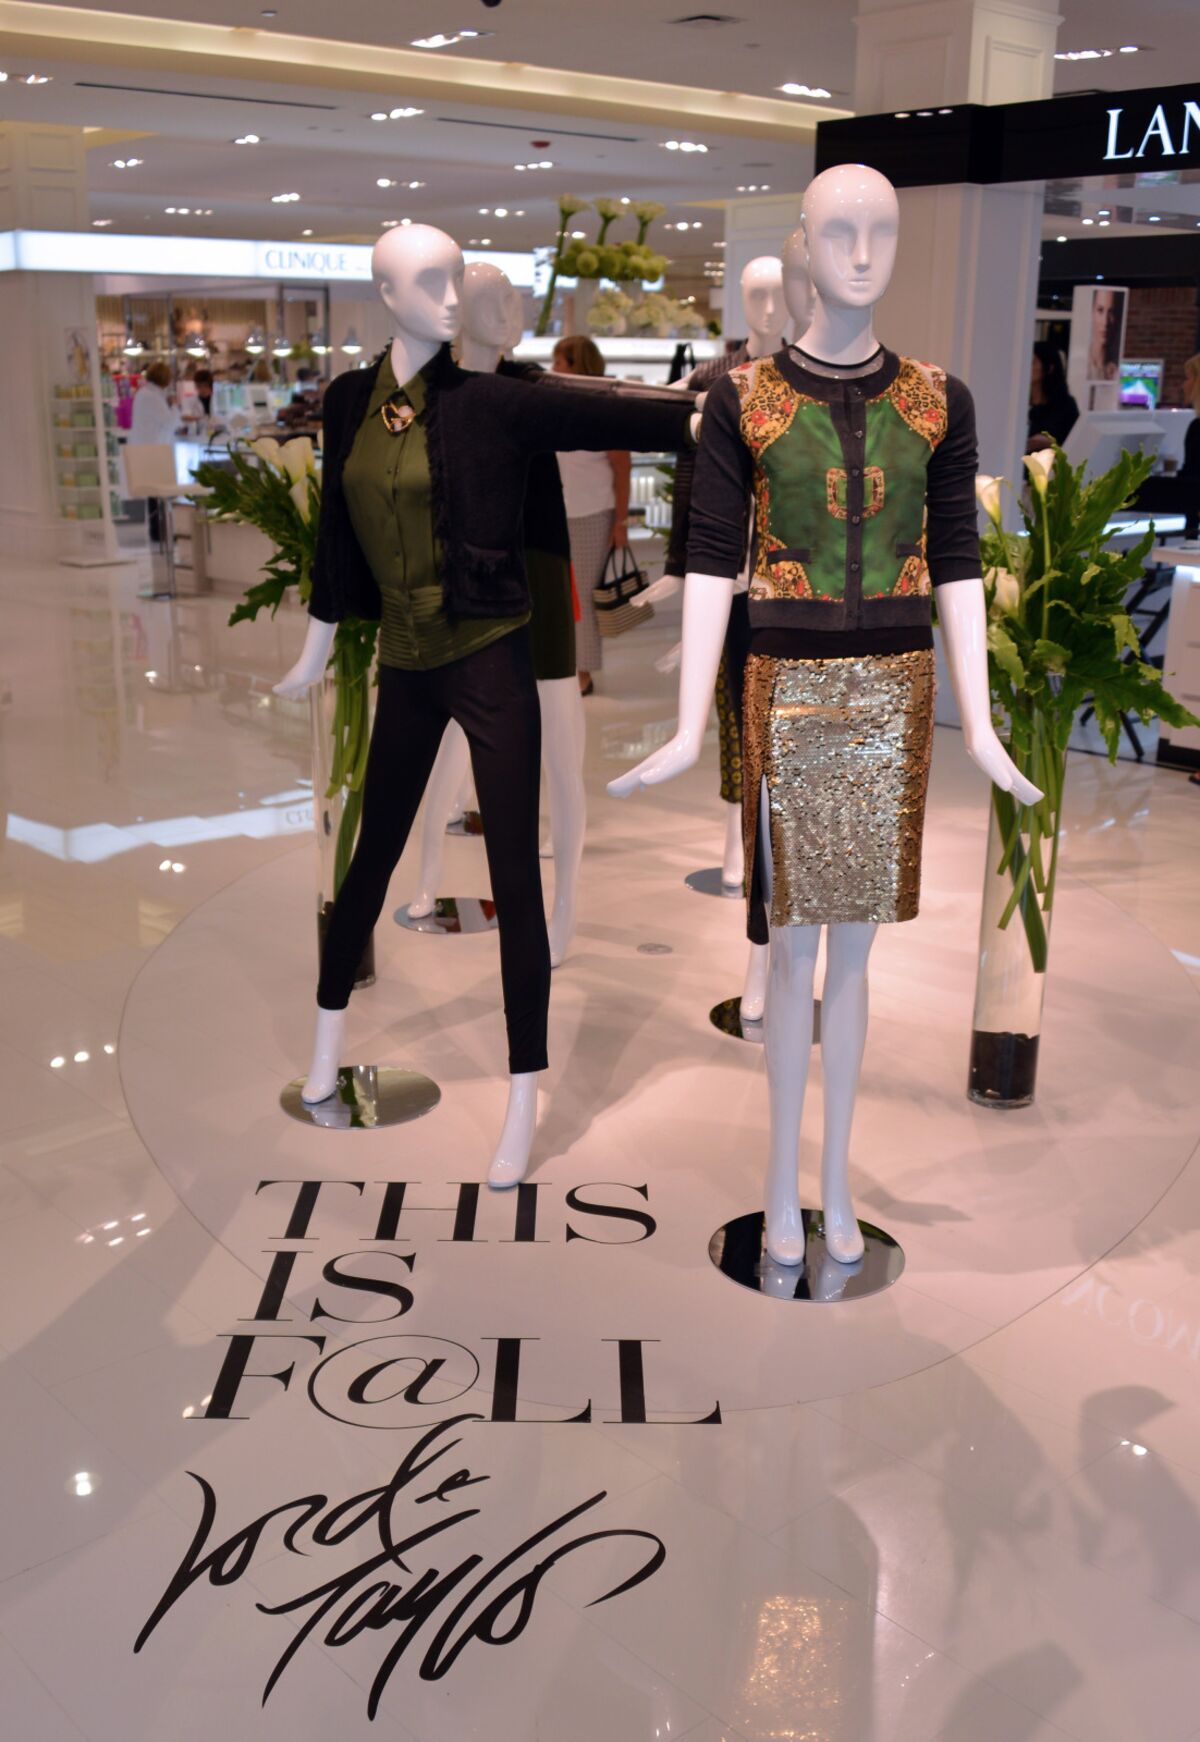 Struggling department store chain Lord & Taylor will liquidate its